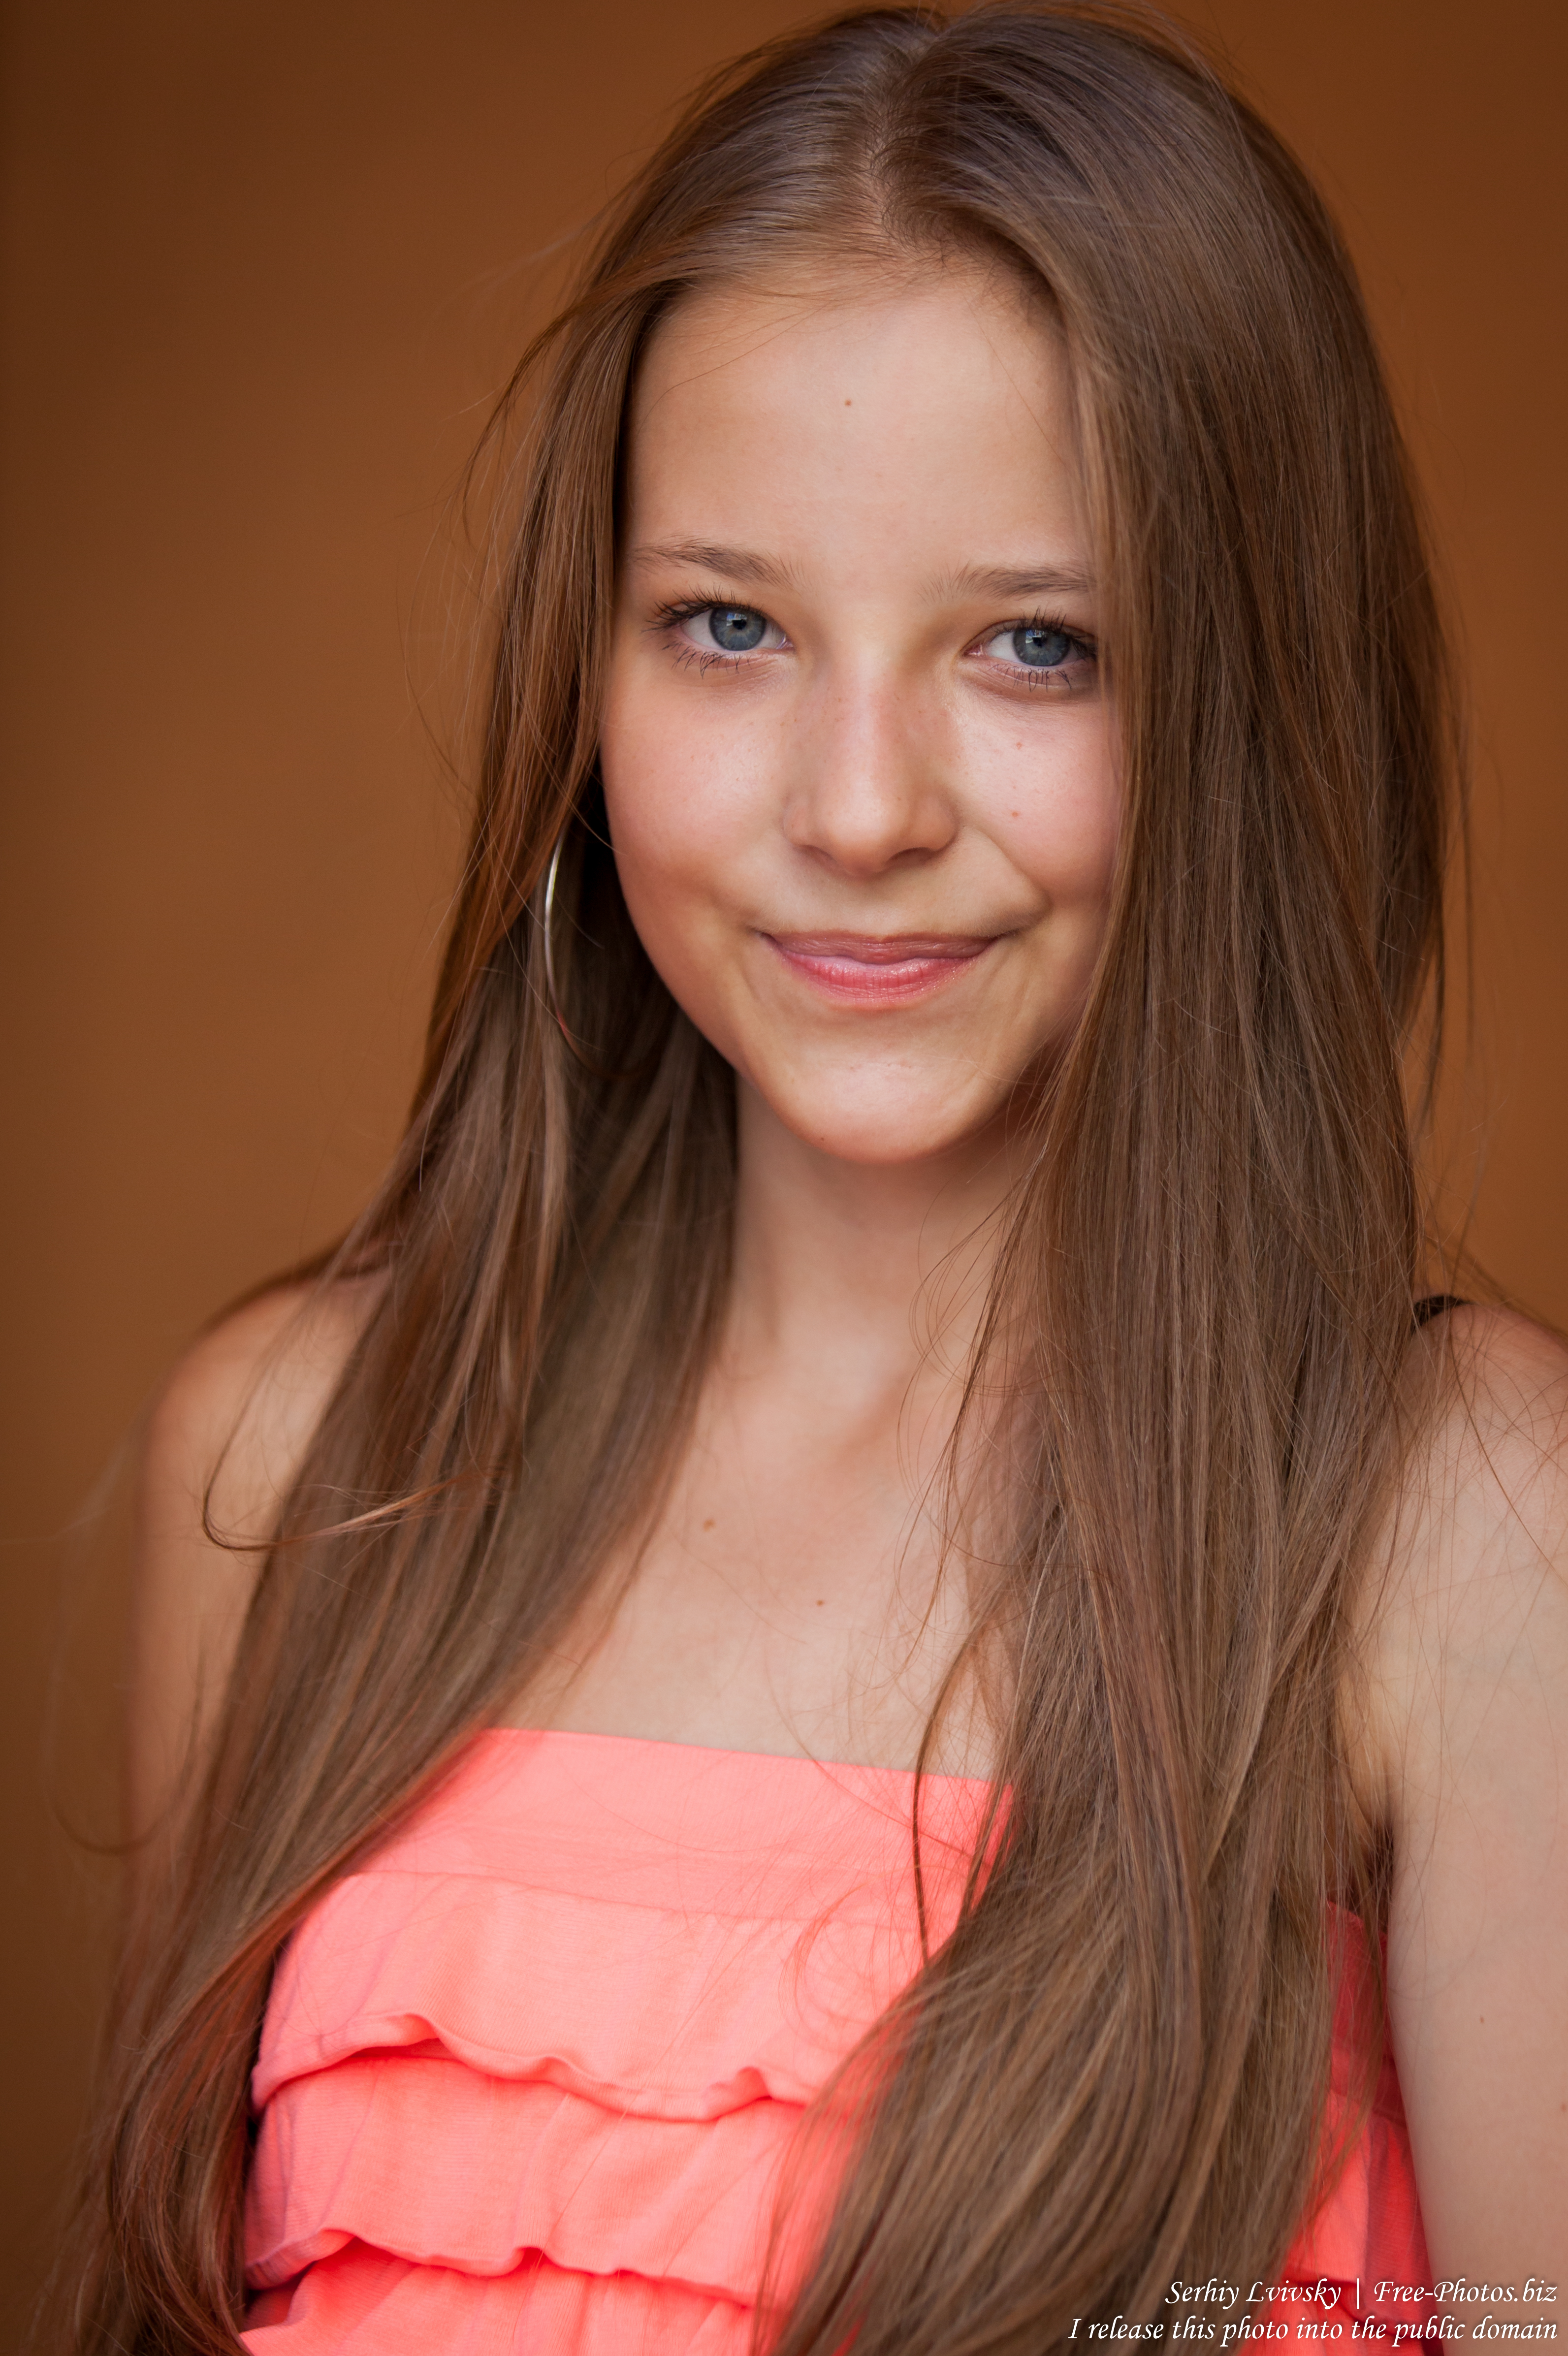 Photo Of A Pretty 13 Year Old Girl Photographed In July 2015 By Serhiy Lvivsky Picture 3